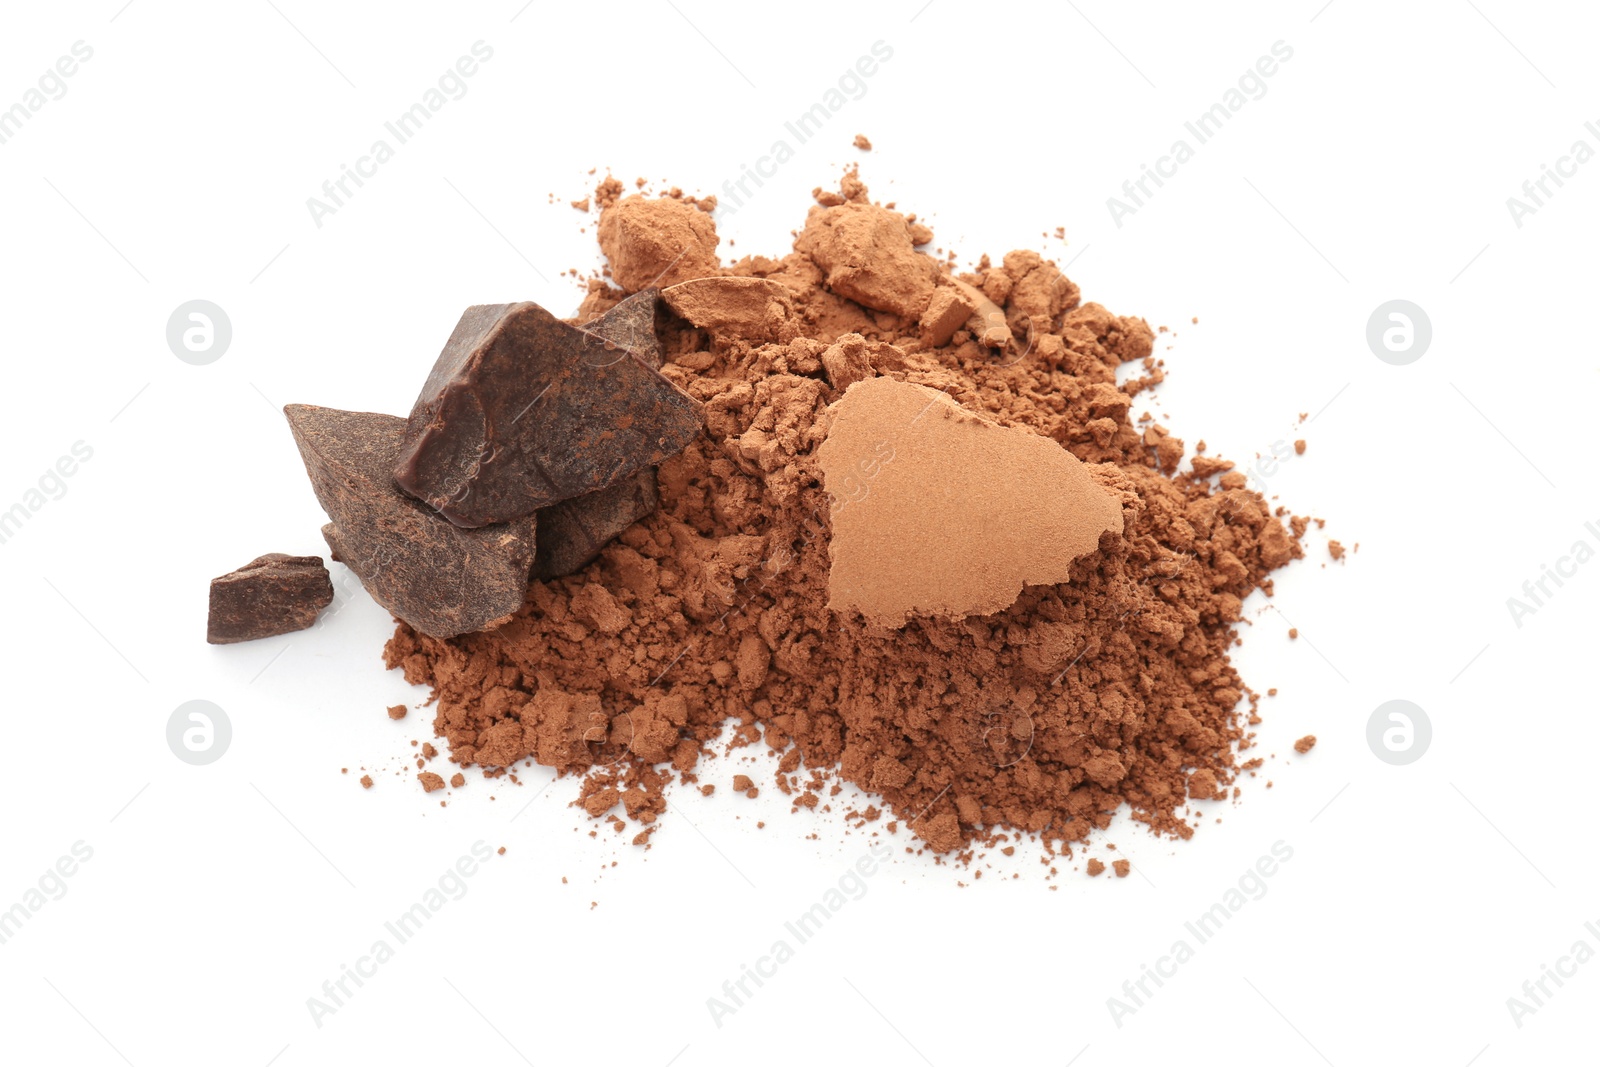 Photo of Cocoa powder and pieces of chocolate on white background